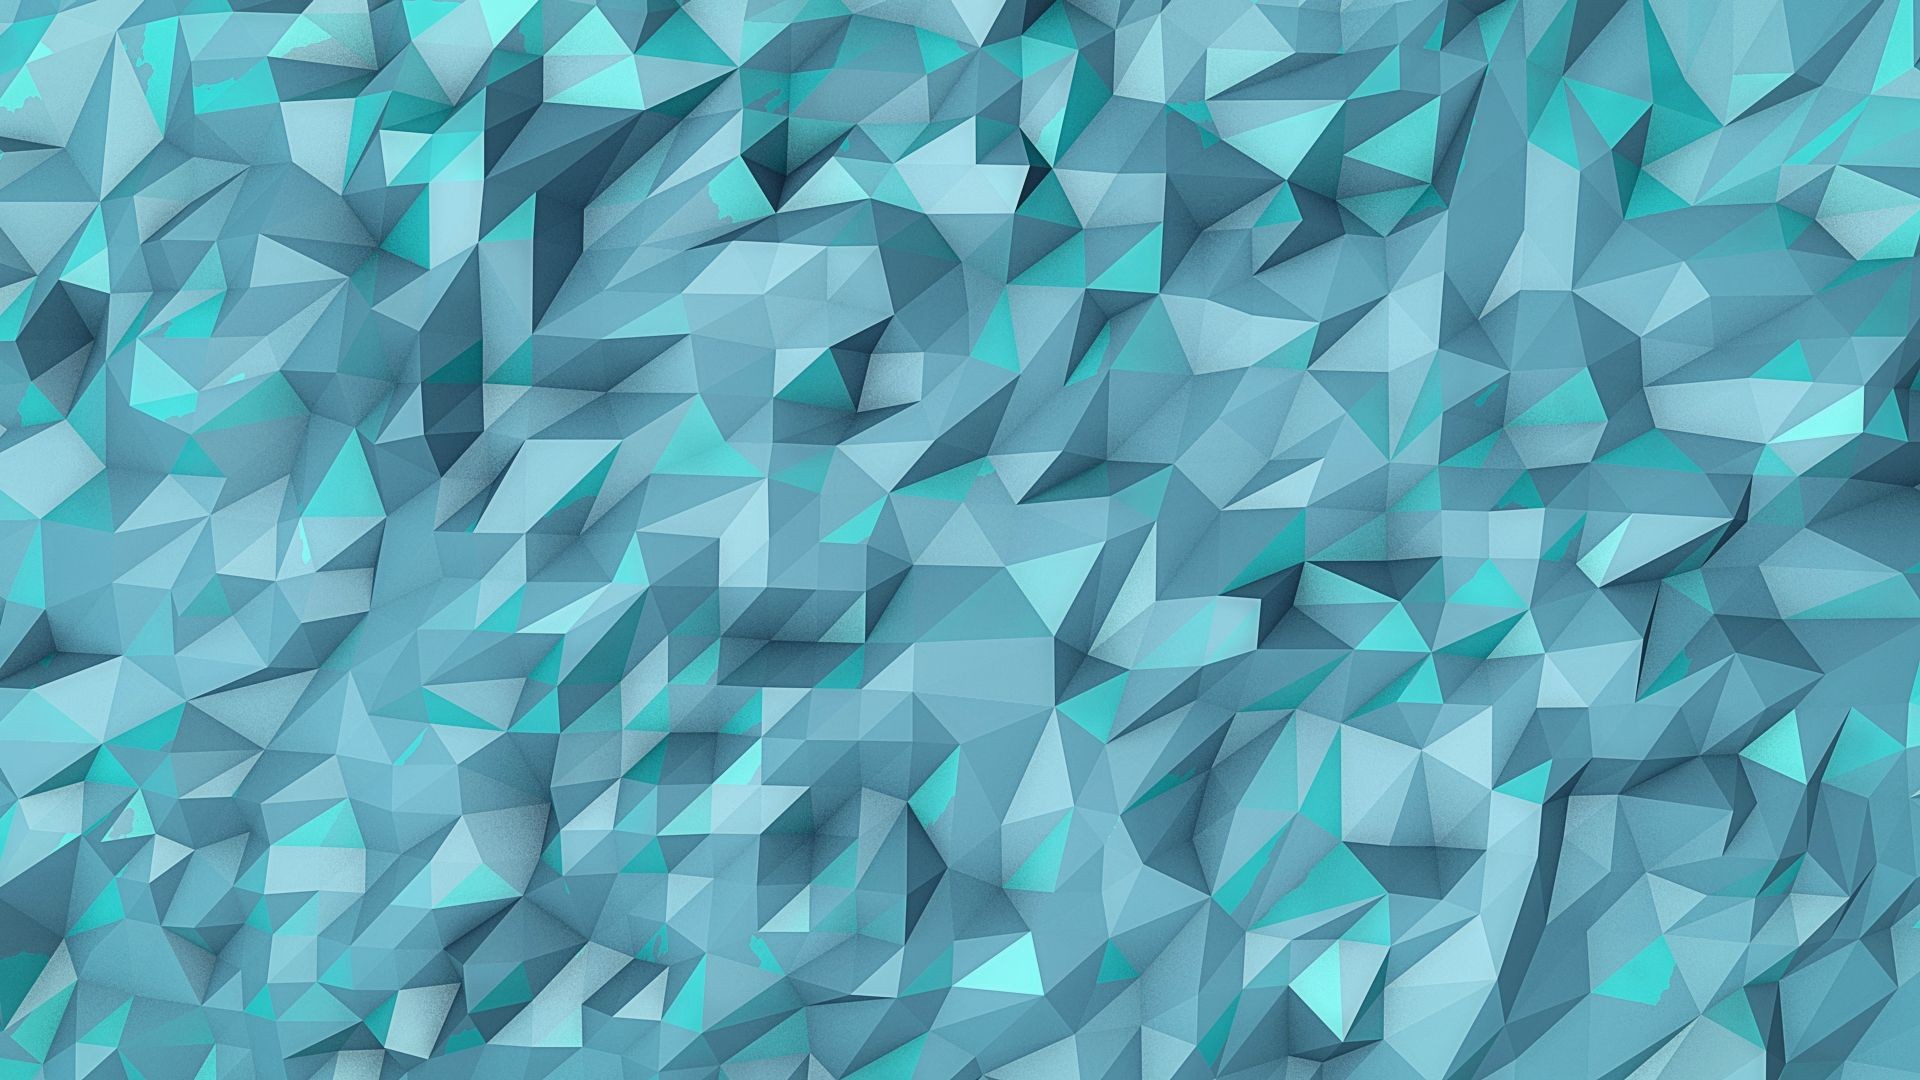 Low Poly Background ·① Download Free Full Hd Wallpapers For Desktop Mobile Laptop In Any